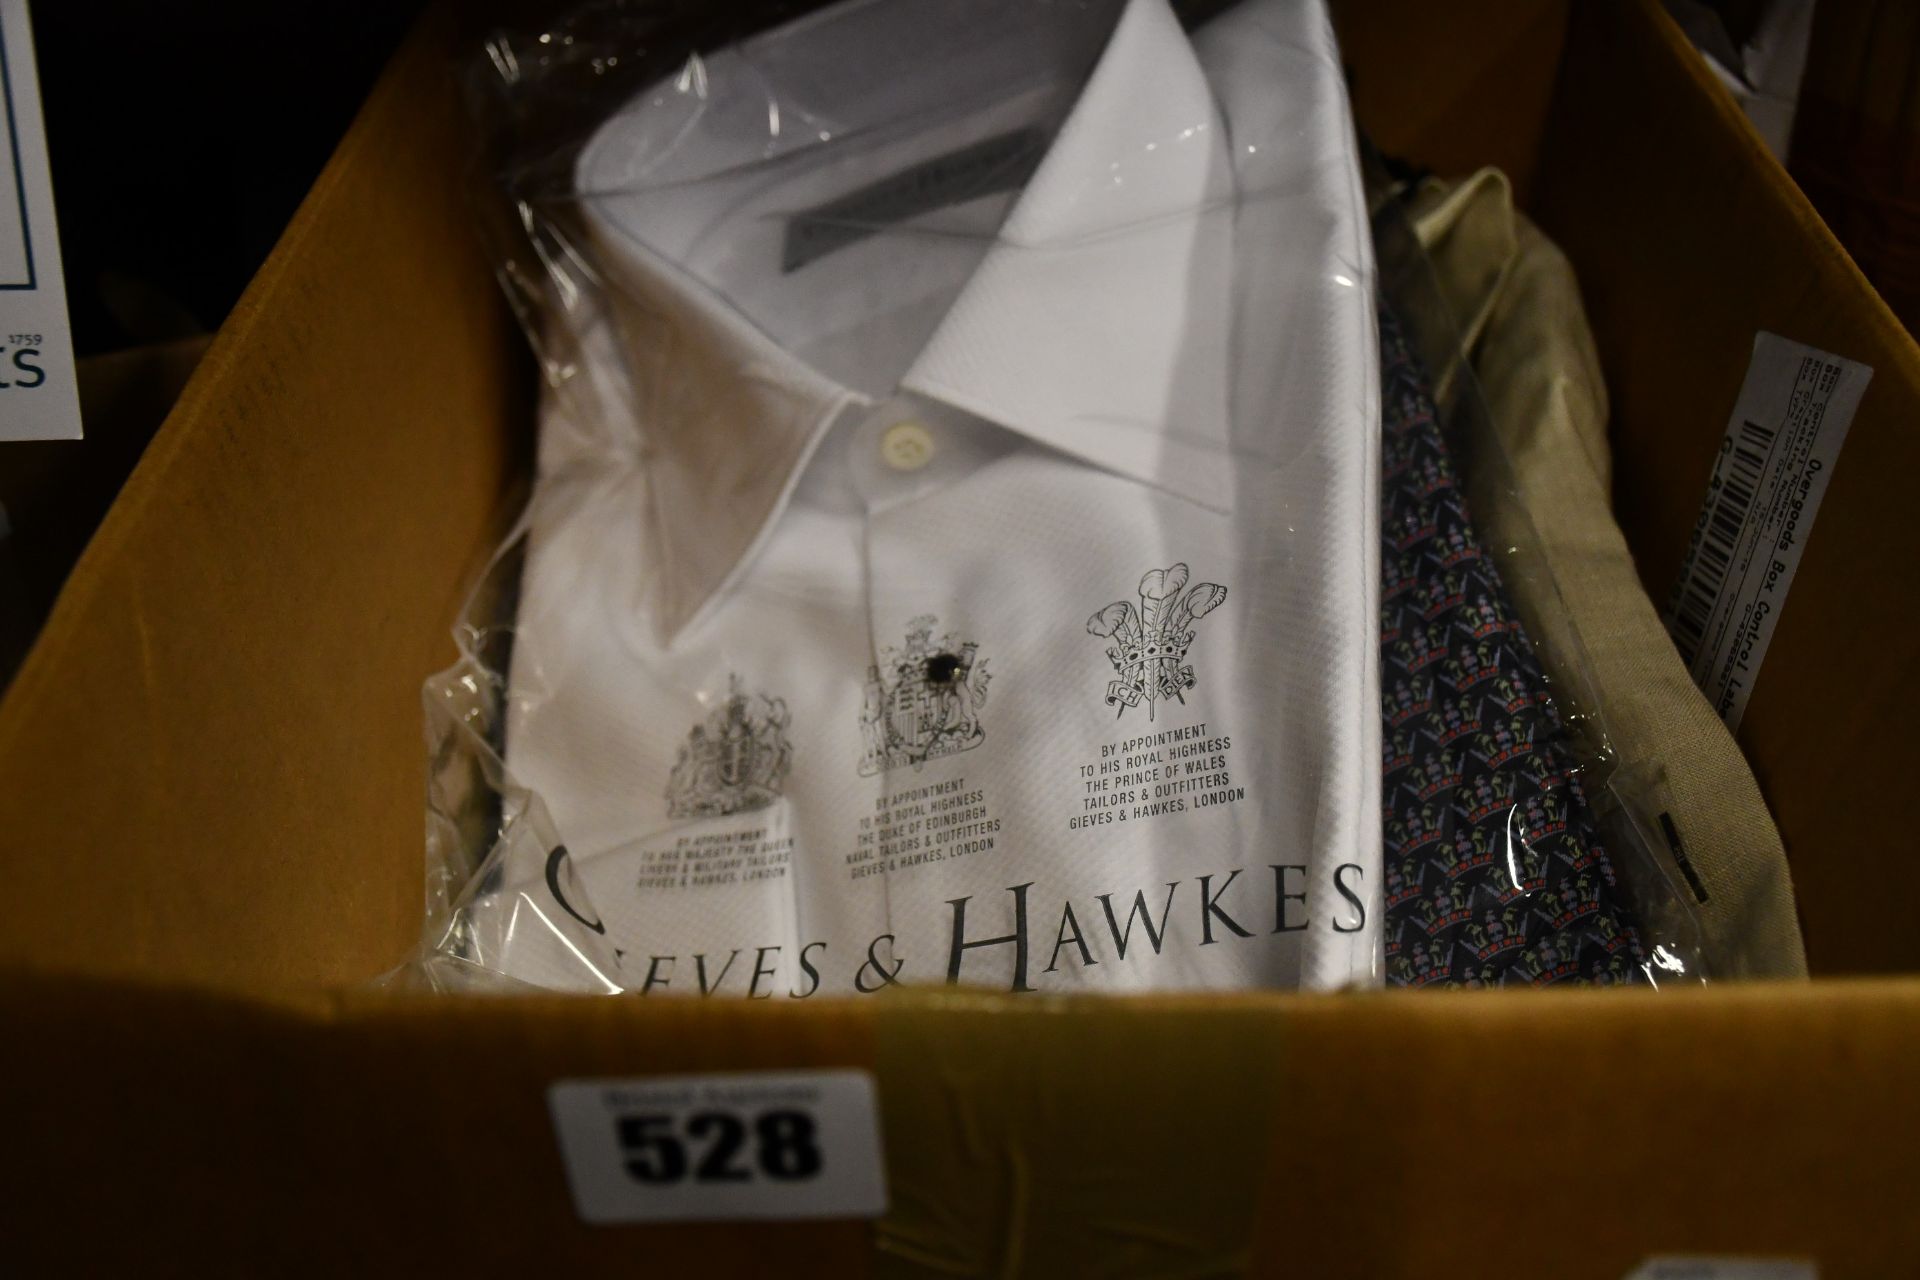 A pair of as new Gieves & Hawkes trousers (34) and two Gieves & Hawkes shirts (1 x L, 1 x 16").